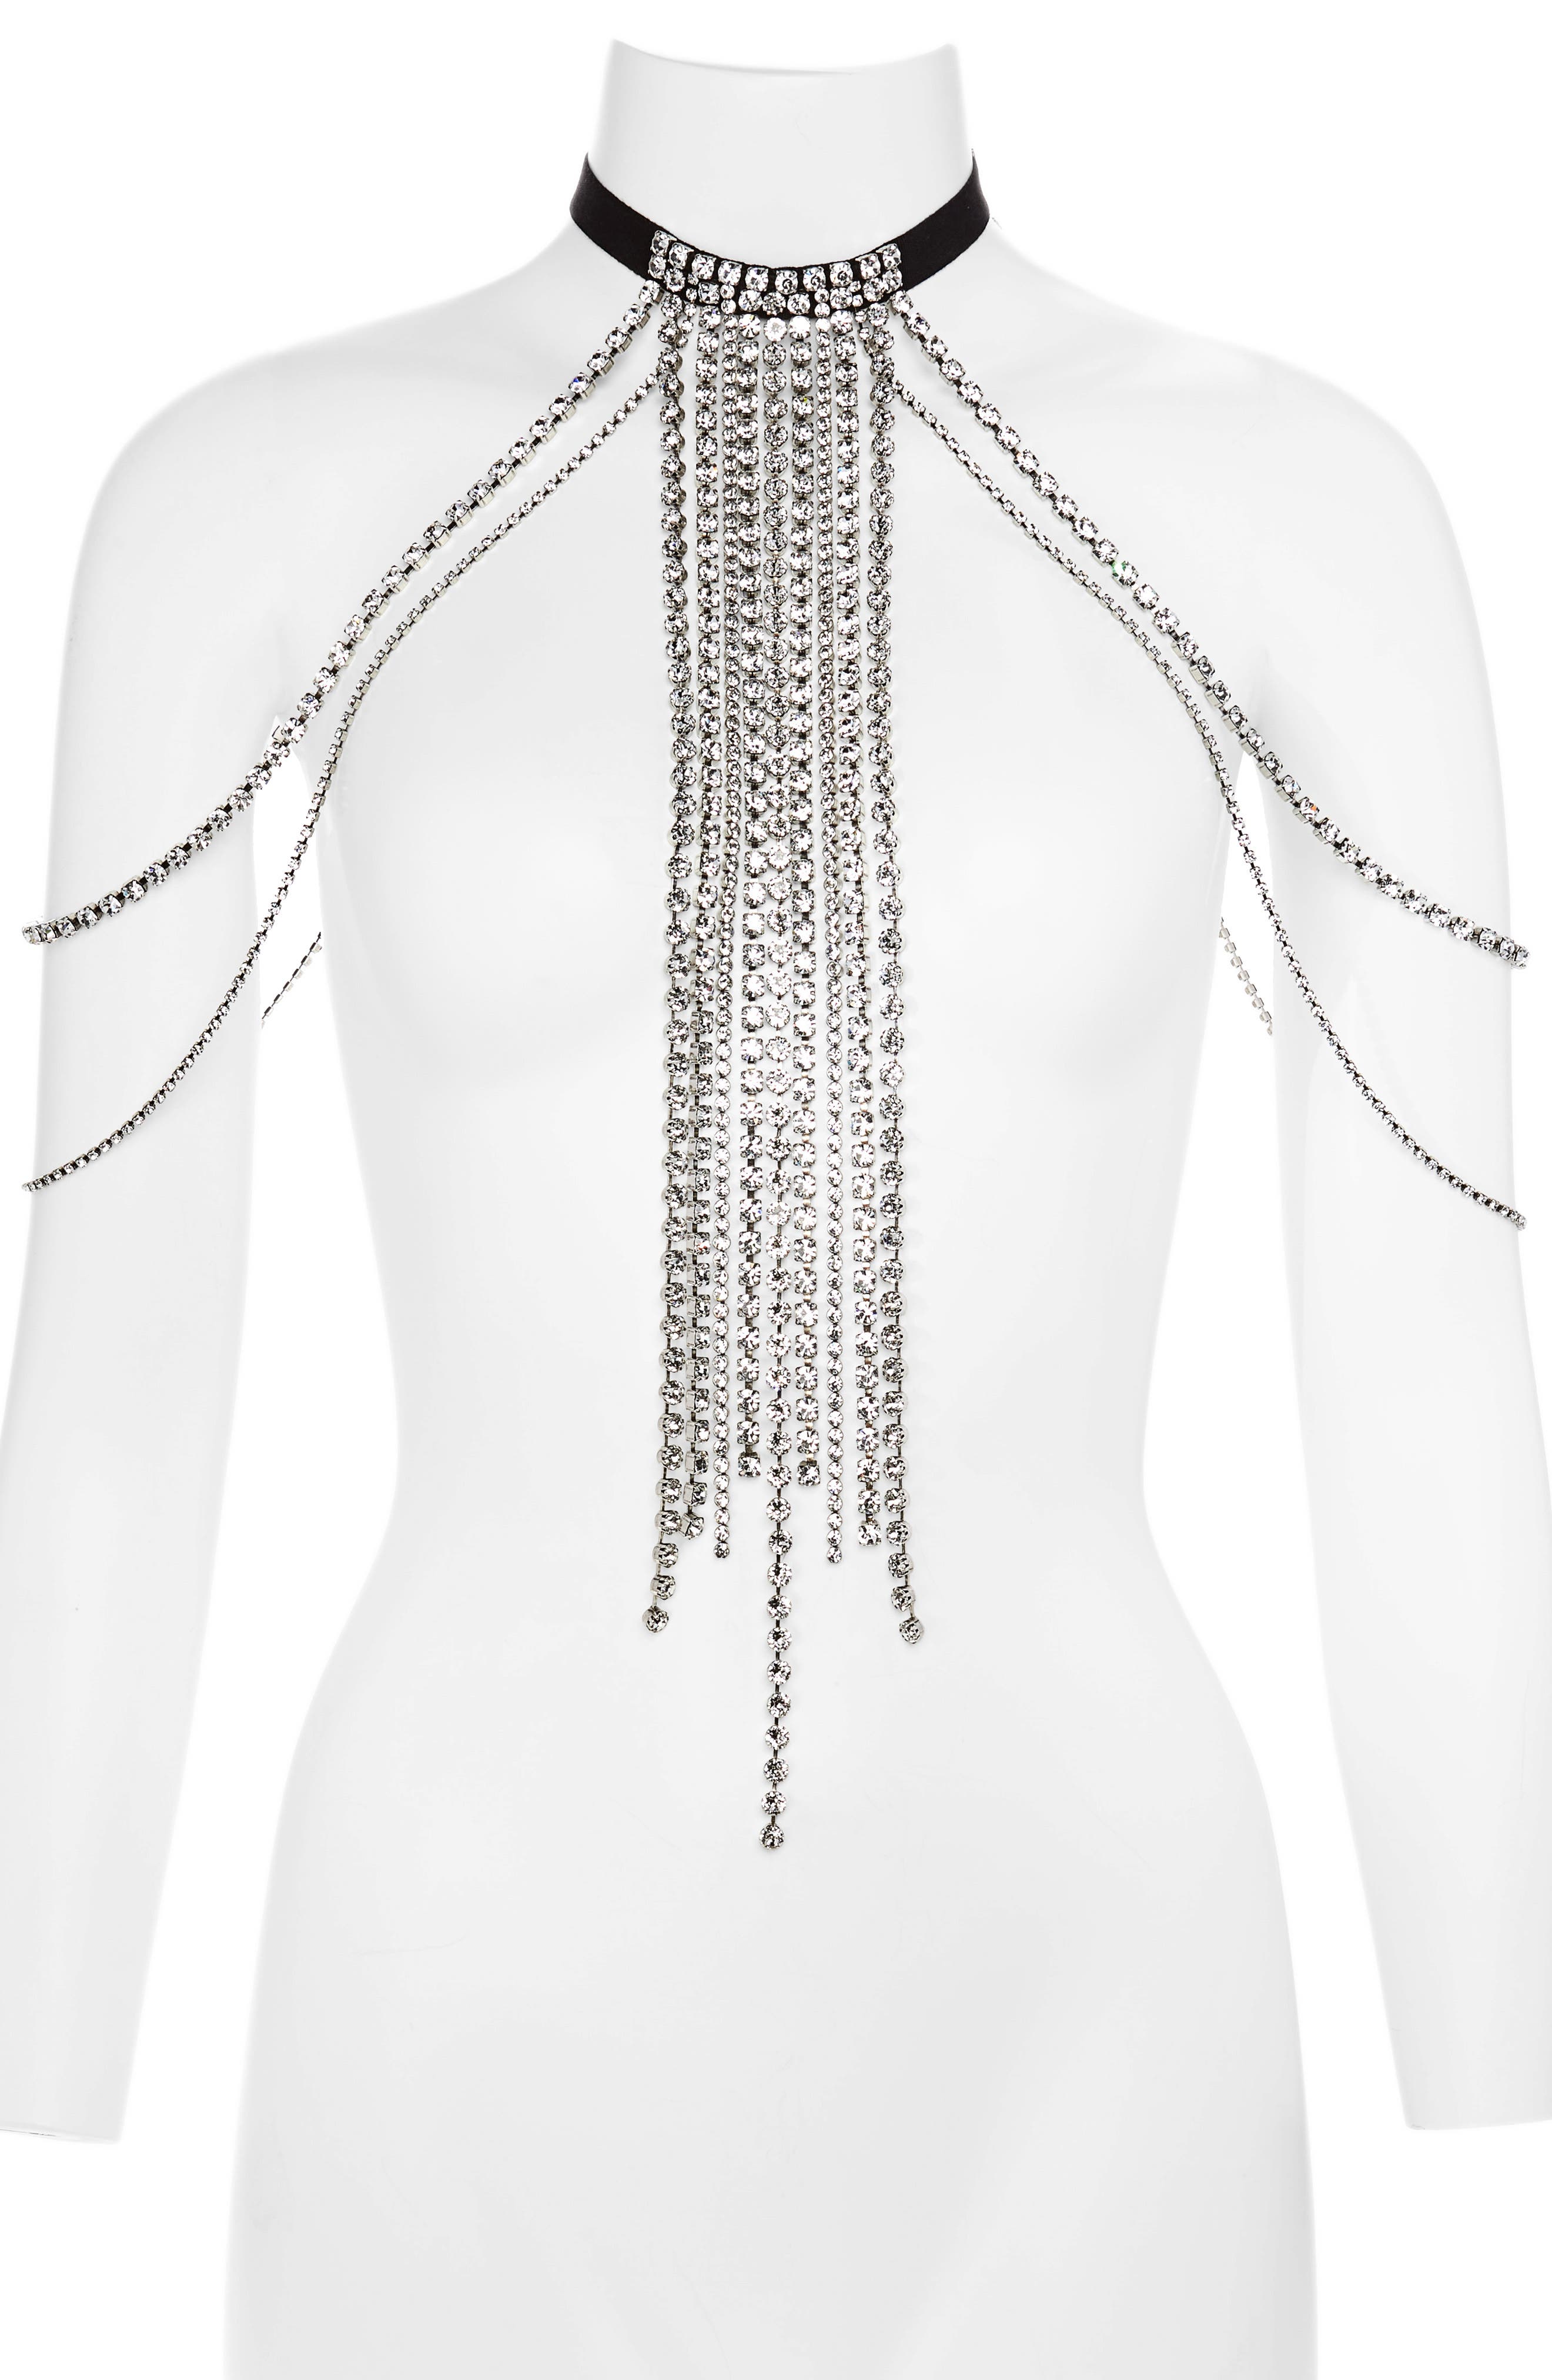 Isabel Marant Statement Necklace black-silver-colored casual look Jewelry Chains Statement Necklaces 